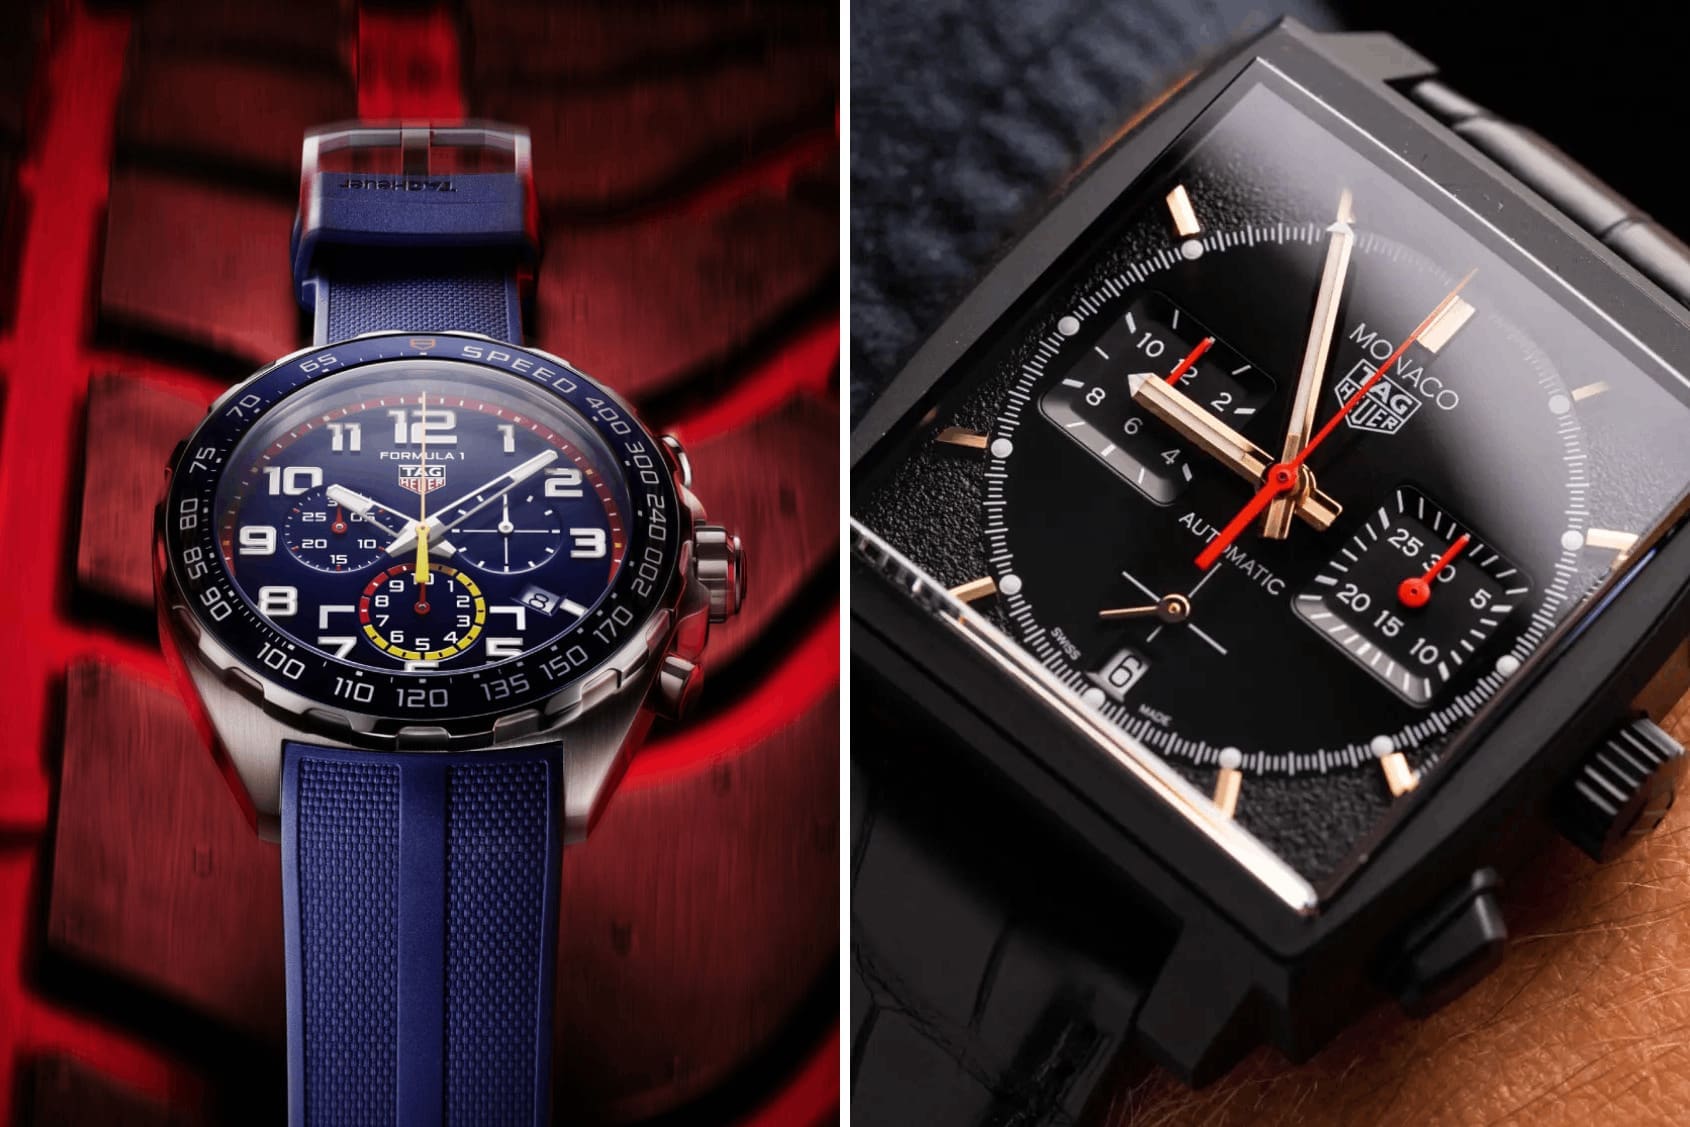 Watches and F1: The TAG Heuer Formula 1 - Worn & Wound